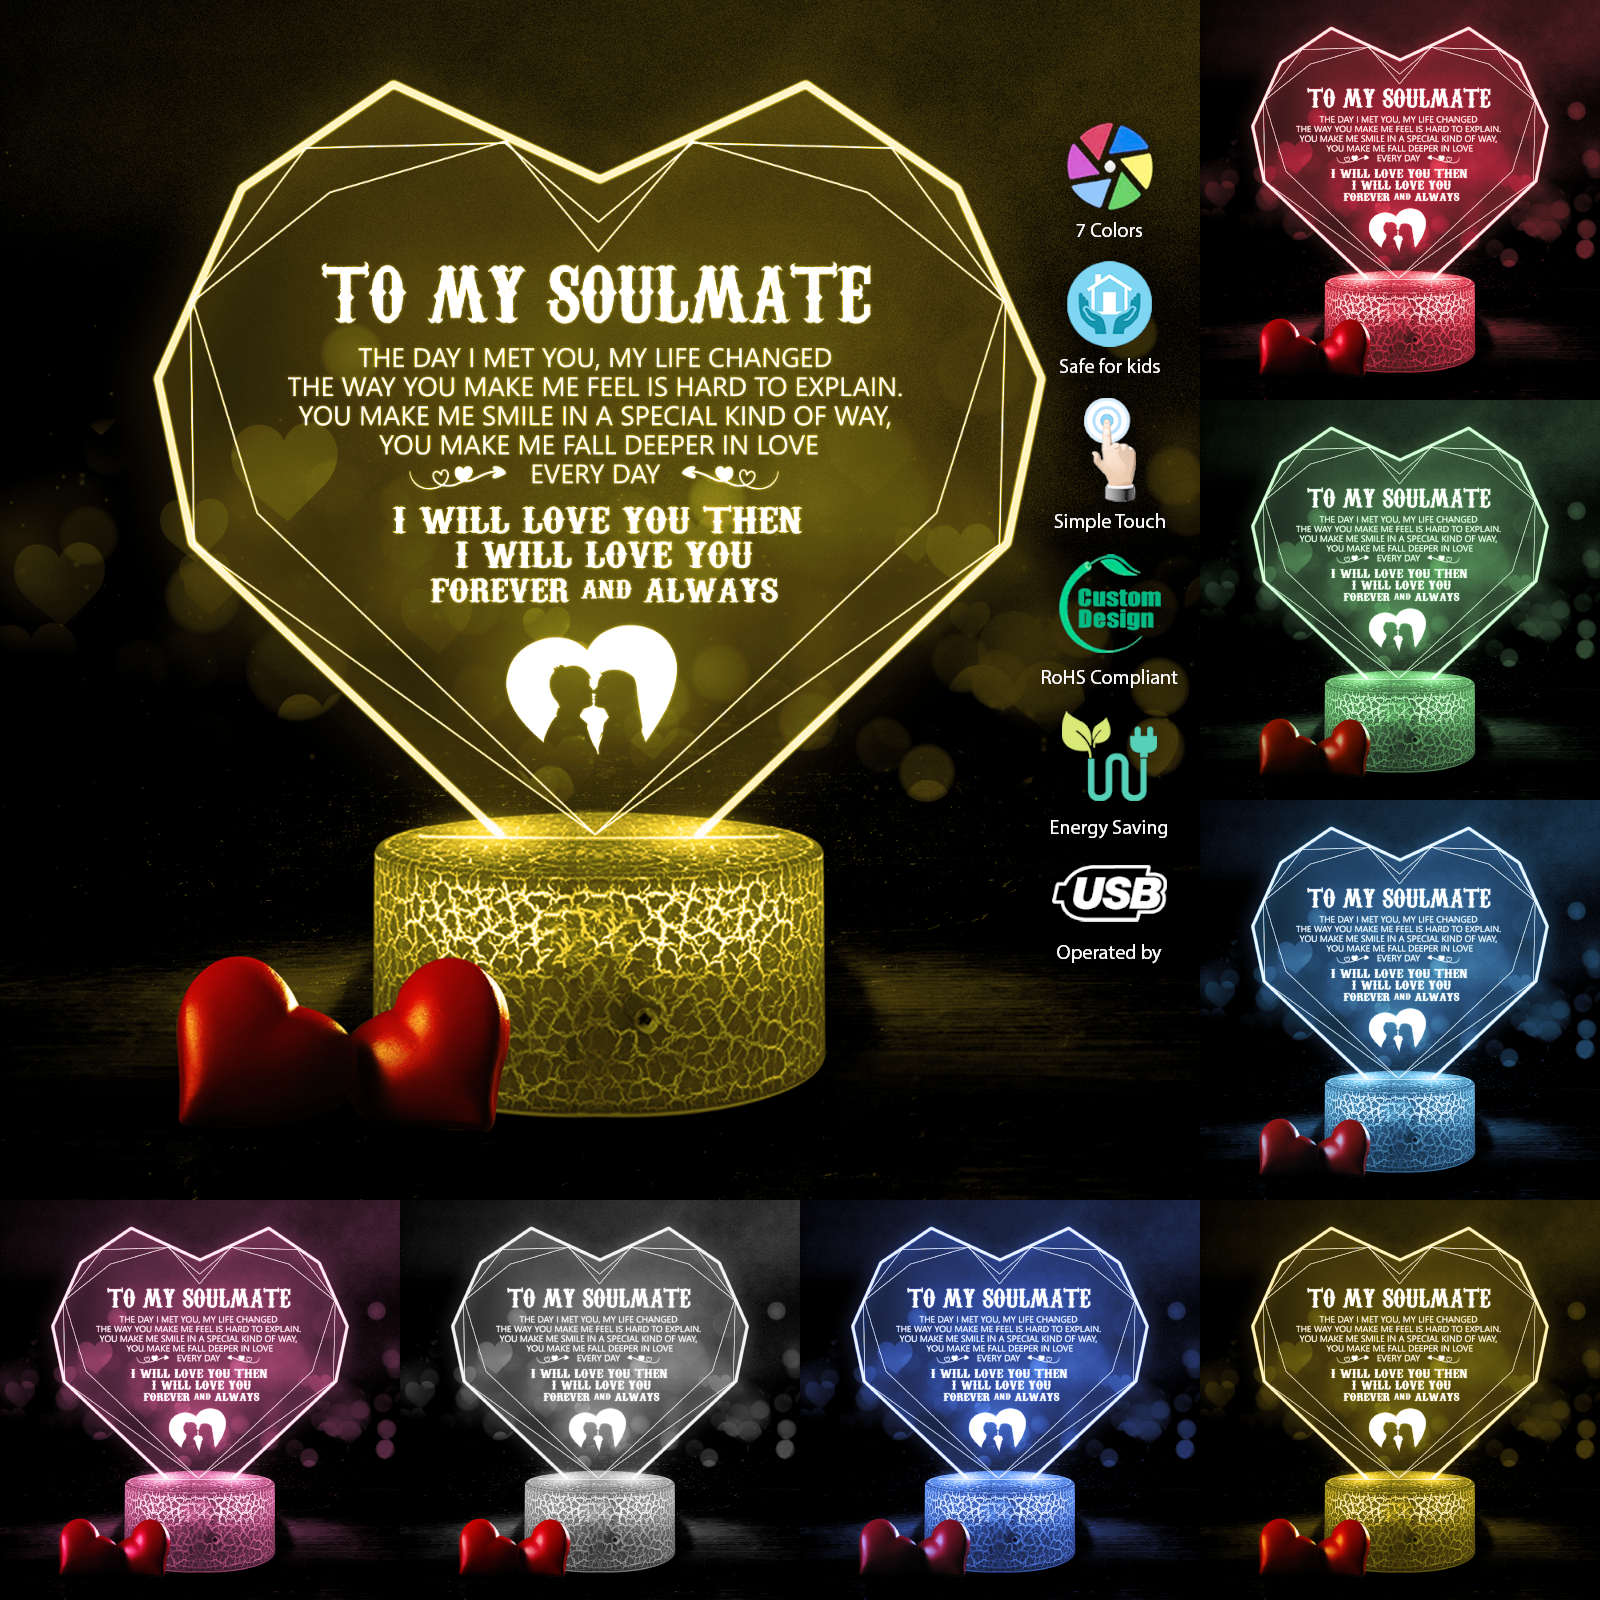 Heart Led Light - Family - To My Soulmate - You Make Me Fall Deeper In Love Every Day - Ukglca13015